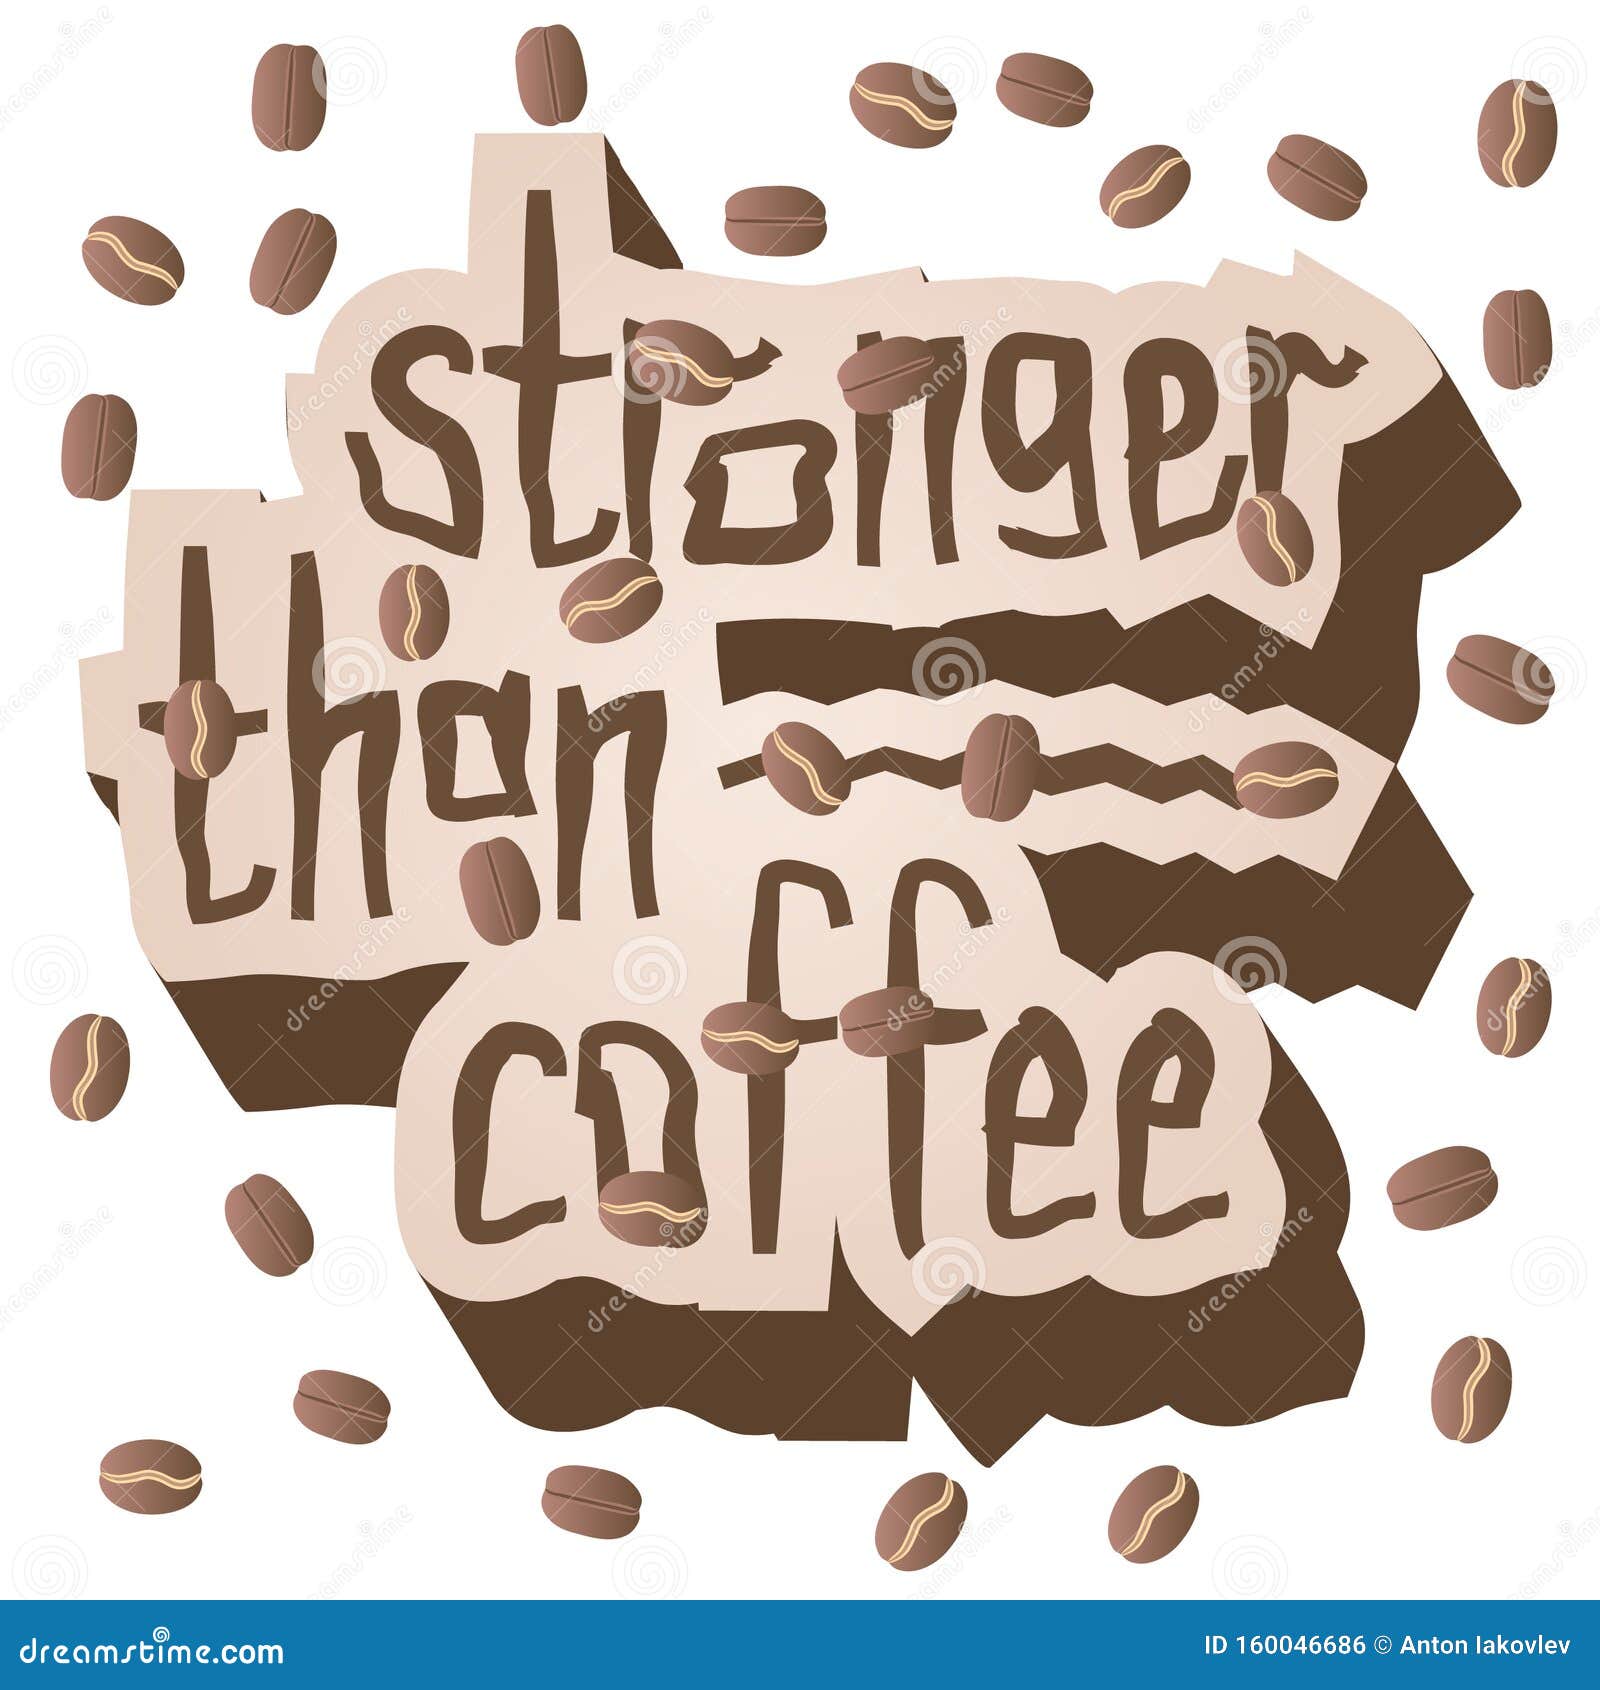 Coffee lover quote stock illustration. Illustration of bold - 160046686